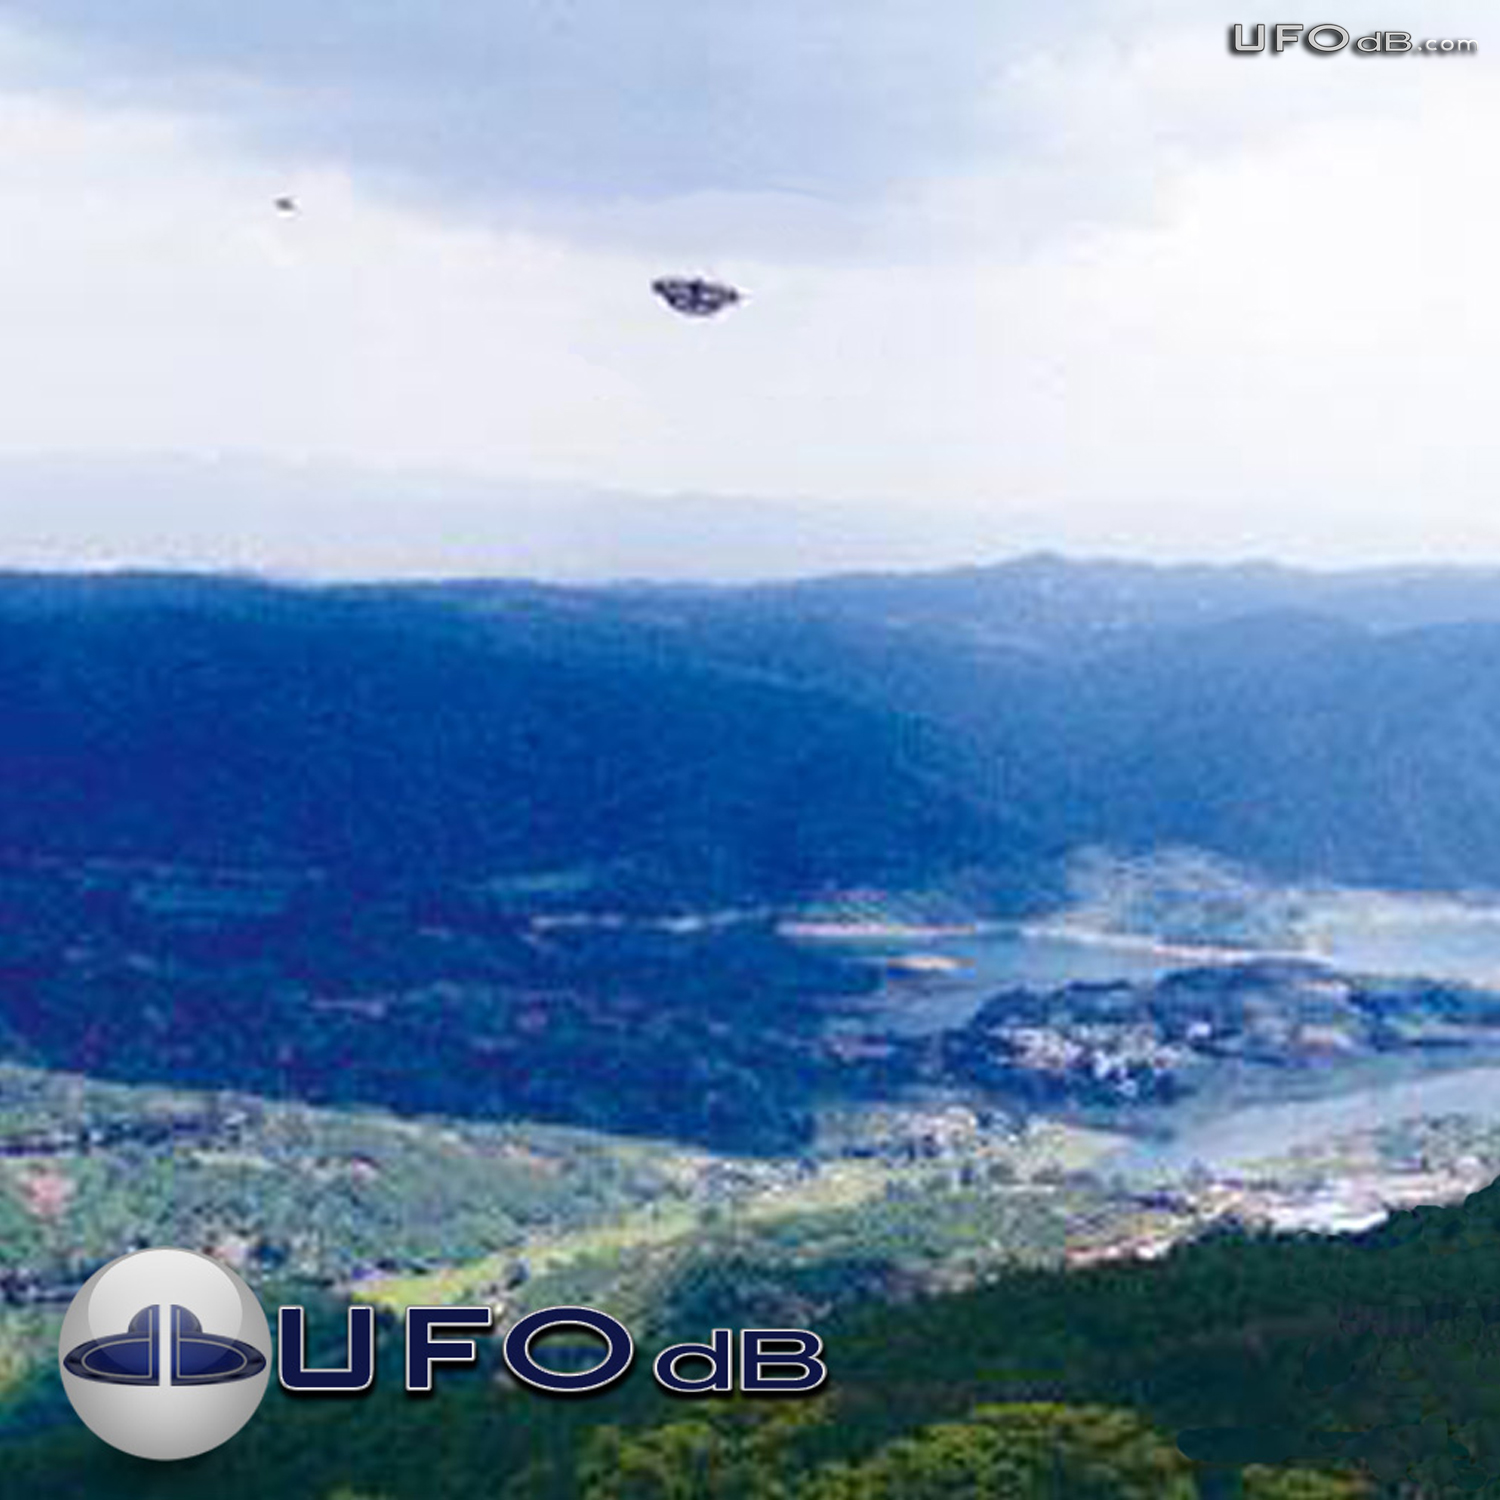 Songhua Ba Reservoir visited by a UFO | Kunming, China | May 22 2011 UFO Picture #341-2